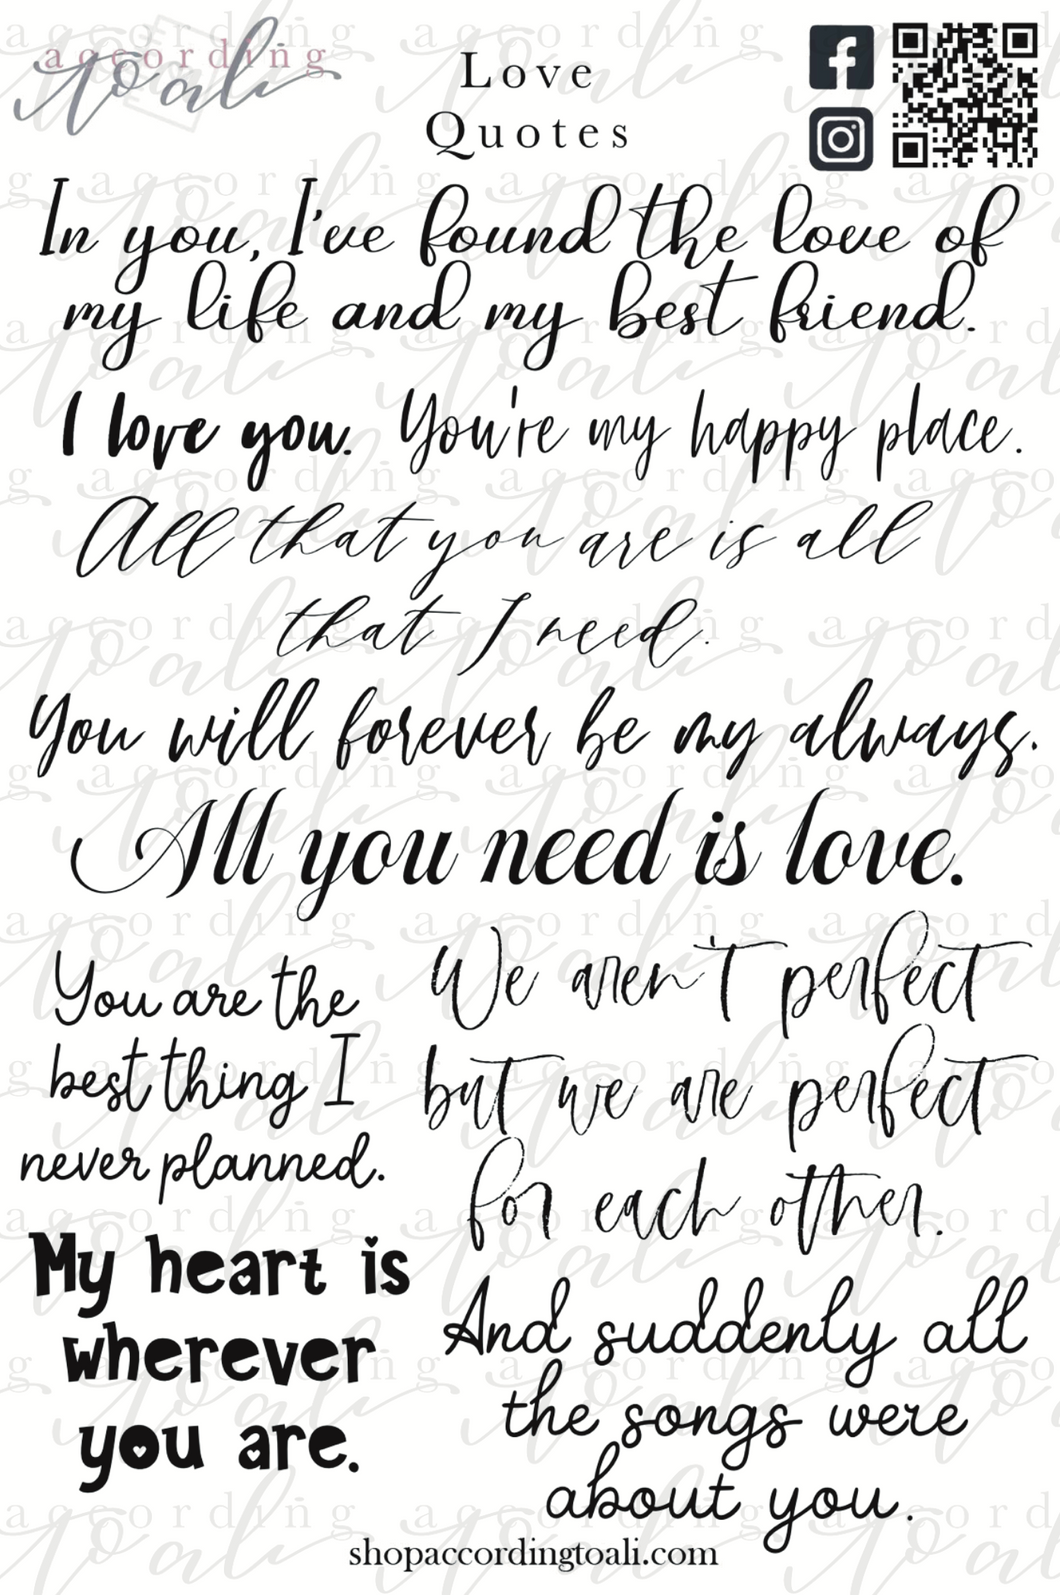 Love Quotes Sticker Sheet